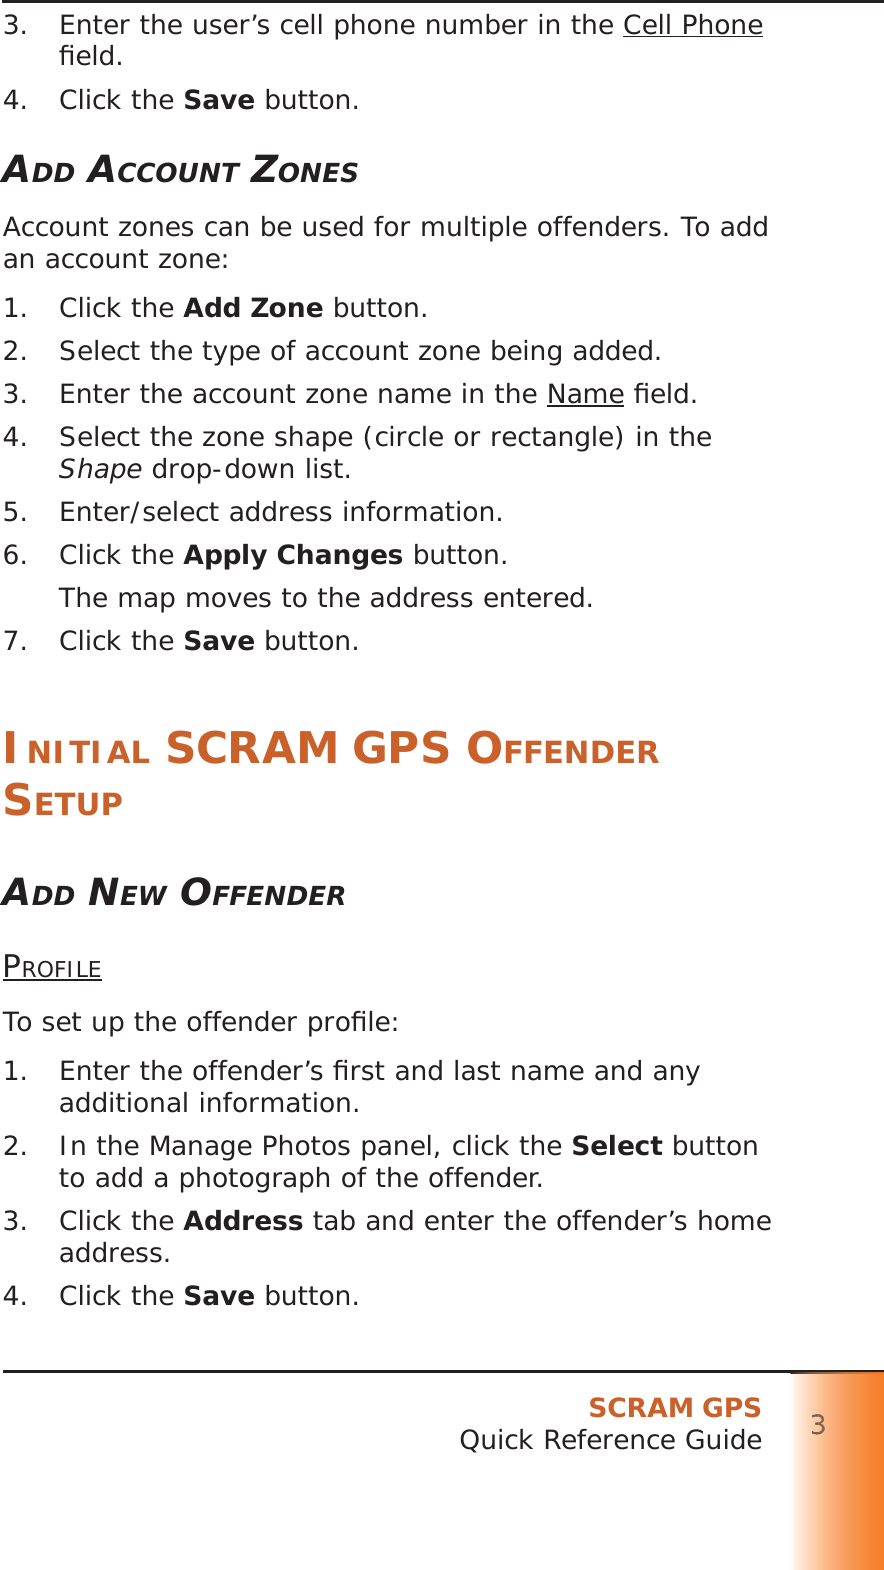 SCRAM GPSQuick Reference Guide 333333333.  Enter the user’s cell phone number in the Cell Phone ﬁ eld.4. Click the Save button.ADD ACCOUNT ZONESAccount zones can be used for multiple offenders. To add an account zone:1. Click the Add Zone button.2.  Select the type of account zone being added.3.  Enter the account zone name in the Name ﬁ eld.4.  Select the zone shape (circle or rectangle) in the Shape drop-down list.5.  Enter/select address information.6. Click the Apply Changes button.The map moves to the address entered.7. Click the Save button.INITIAL SCRAM GPS OFFENDER SETUPADD NEW OFFENDERPROFILETo set up the offender proﬁ le:1.  Enter the offender’s ﬁ rst and last name and any additional information.2.  In the Manage Photos panel, click the Select button to add a photograph of the offender.3. Click the Address tab and enter the offender’s home address.4. Click the Save button.